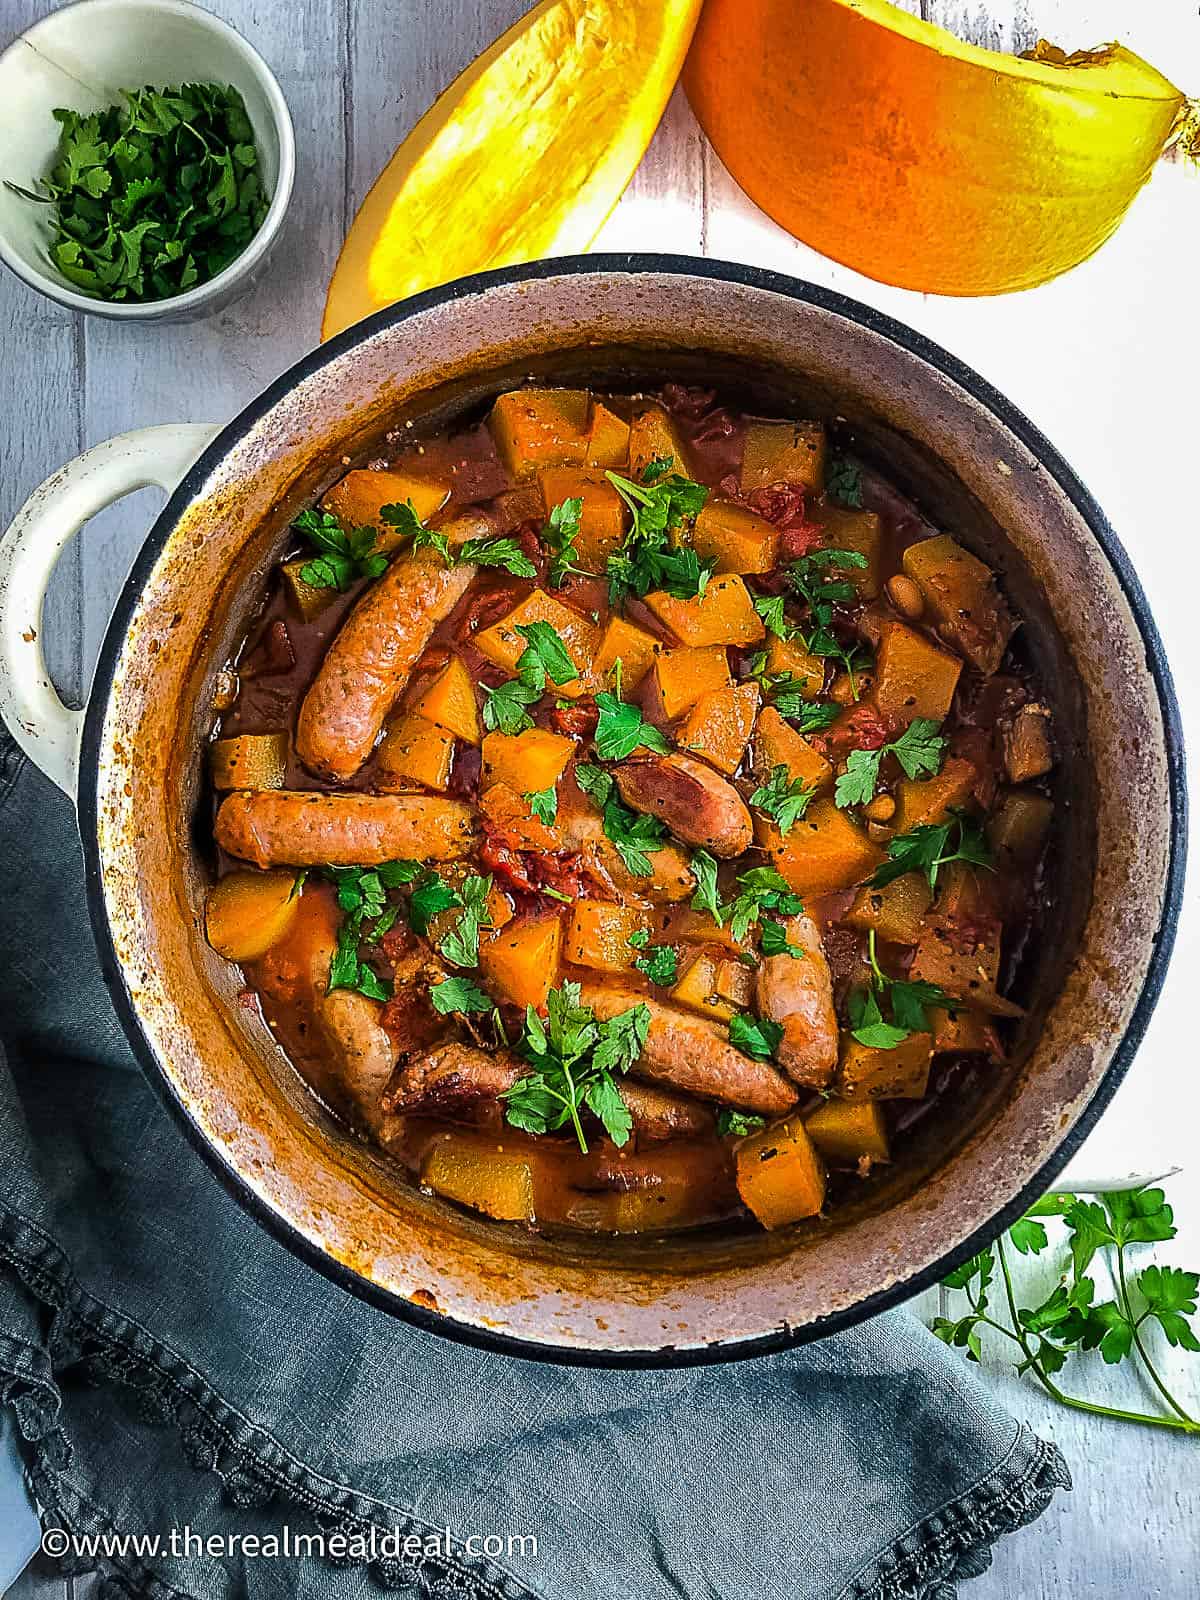 sausage and baked bean casserole with pumpkin in dish topped with fresh parsley